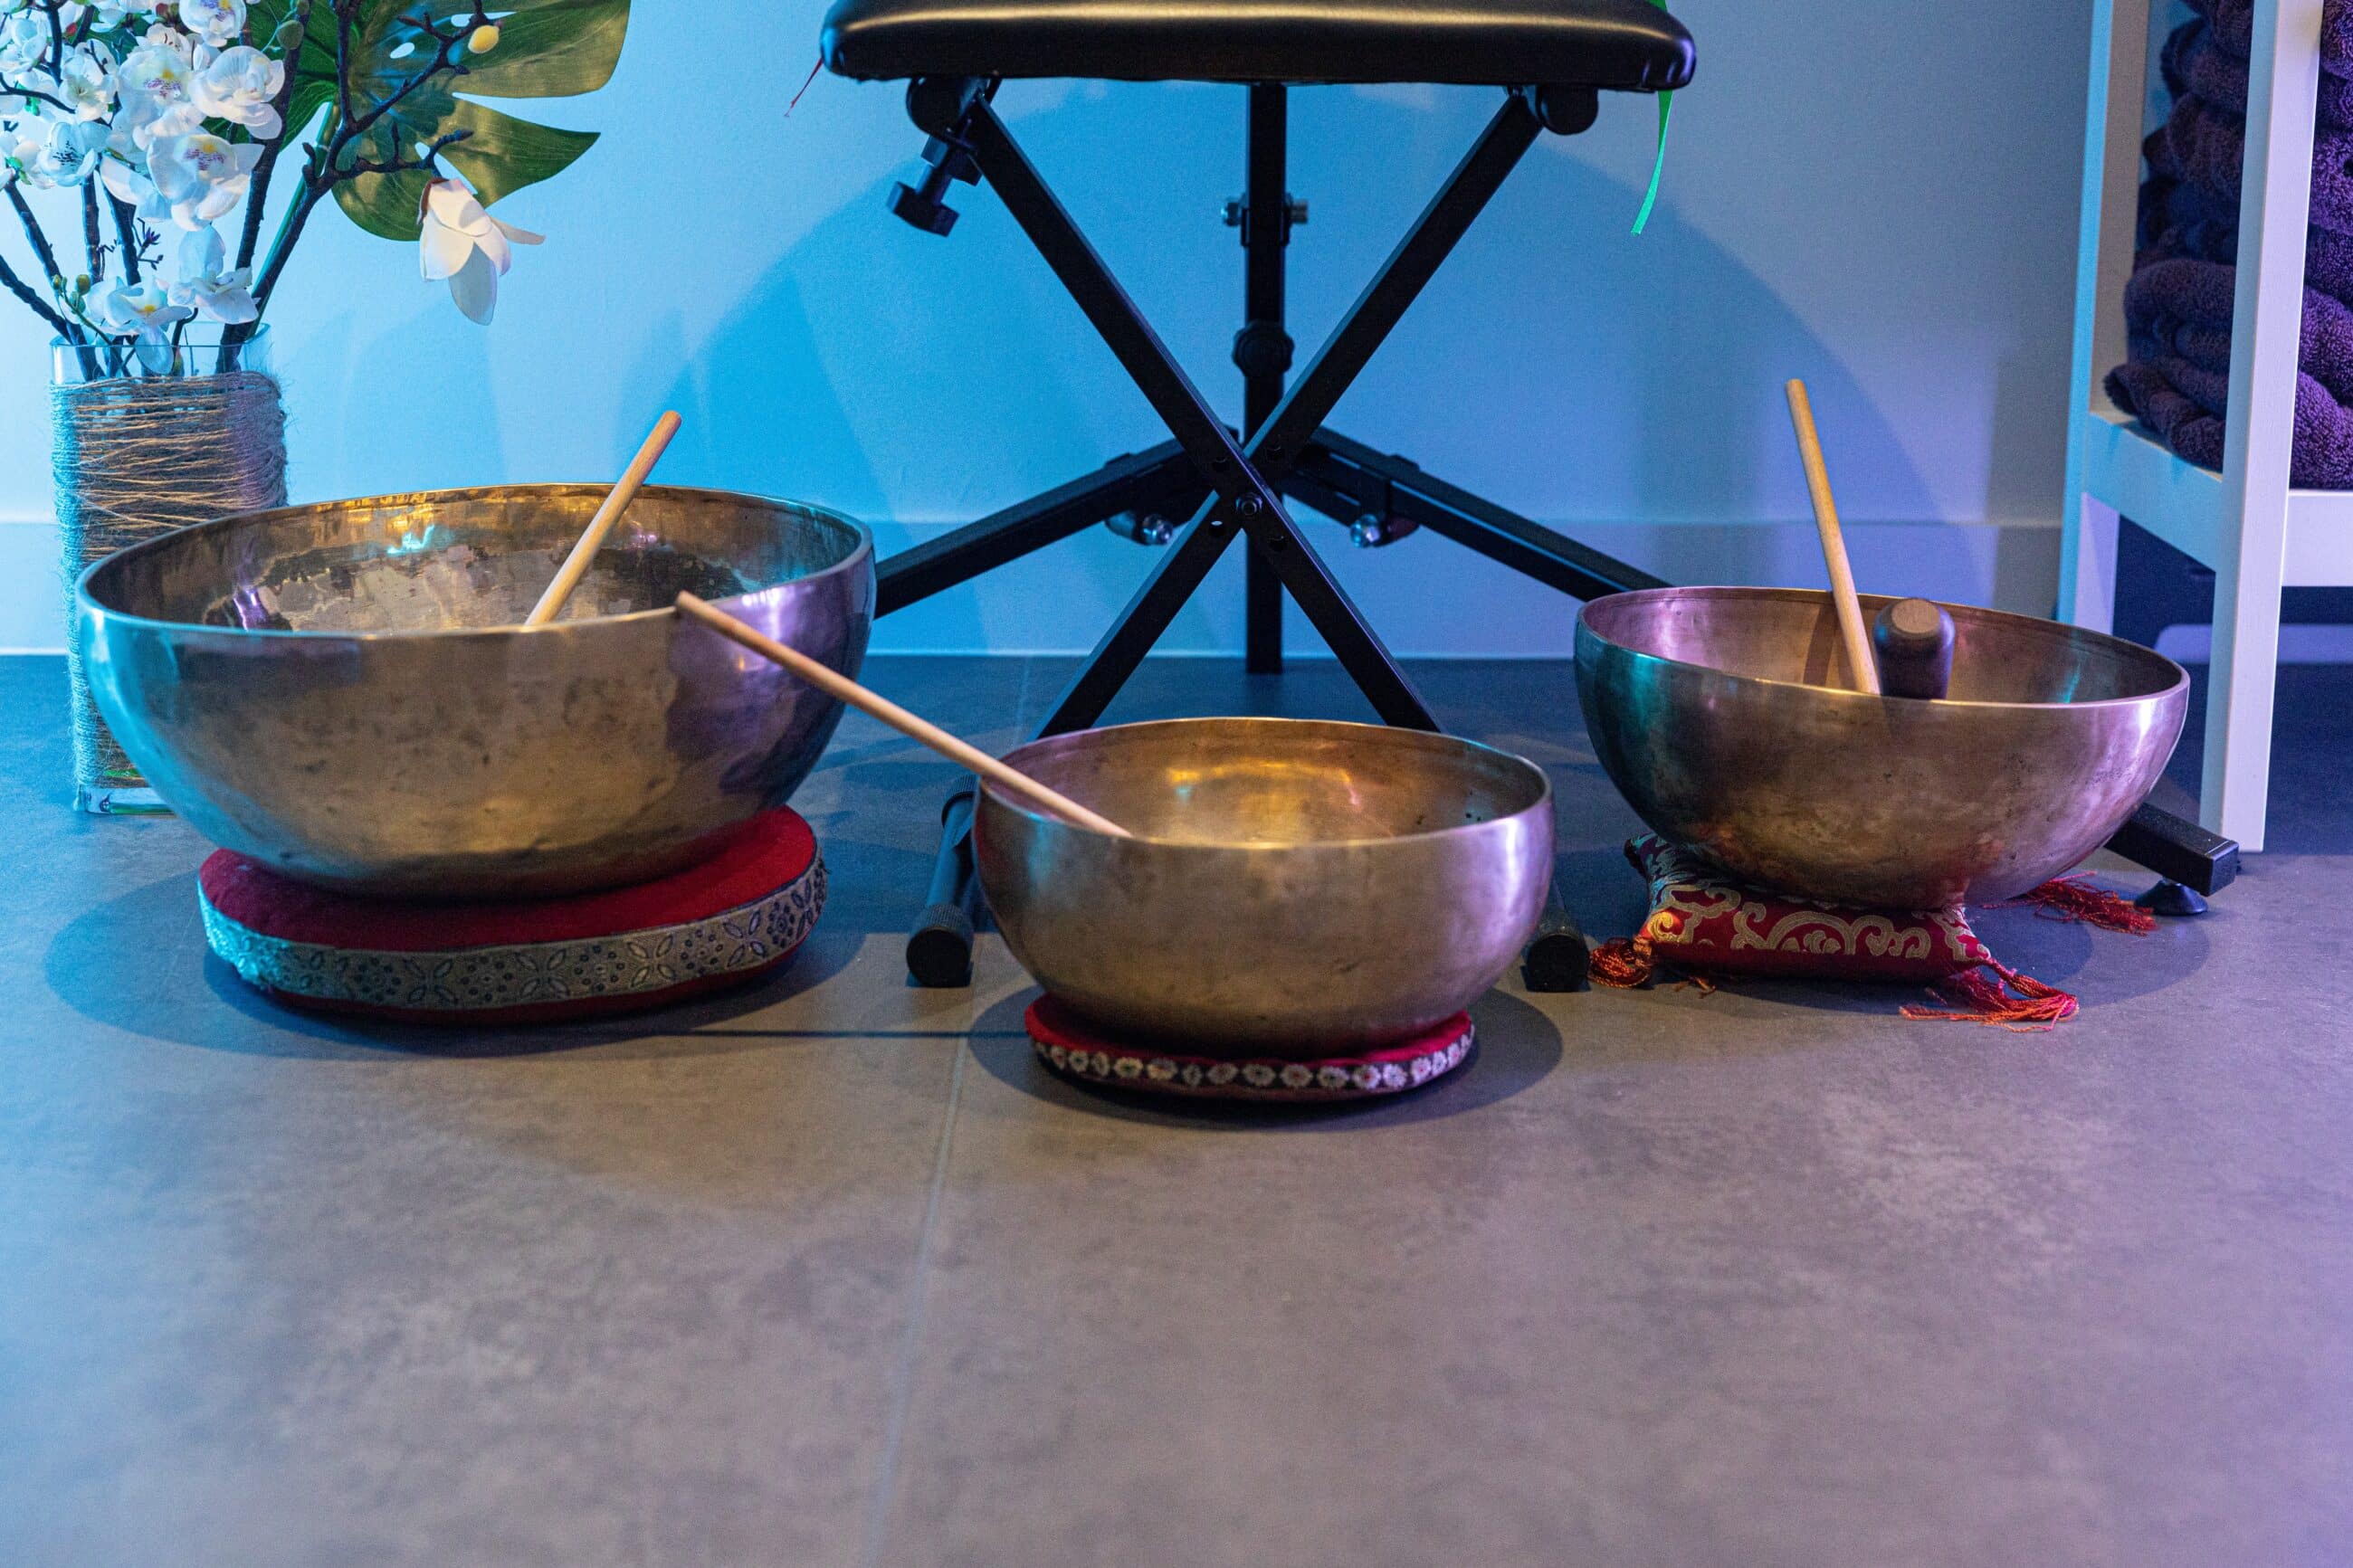 An image of three singing bowls of various sizes.